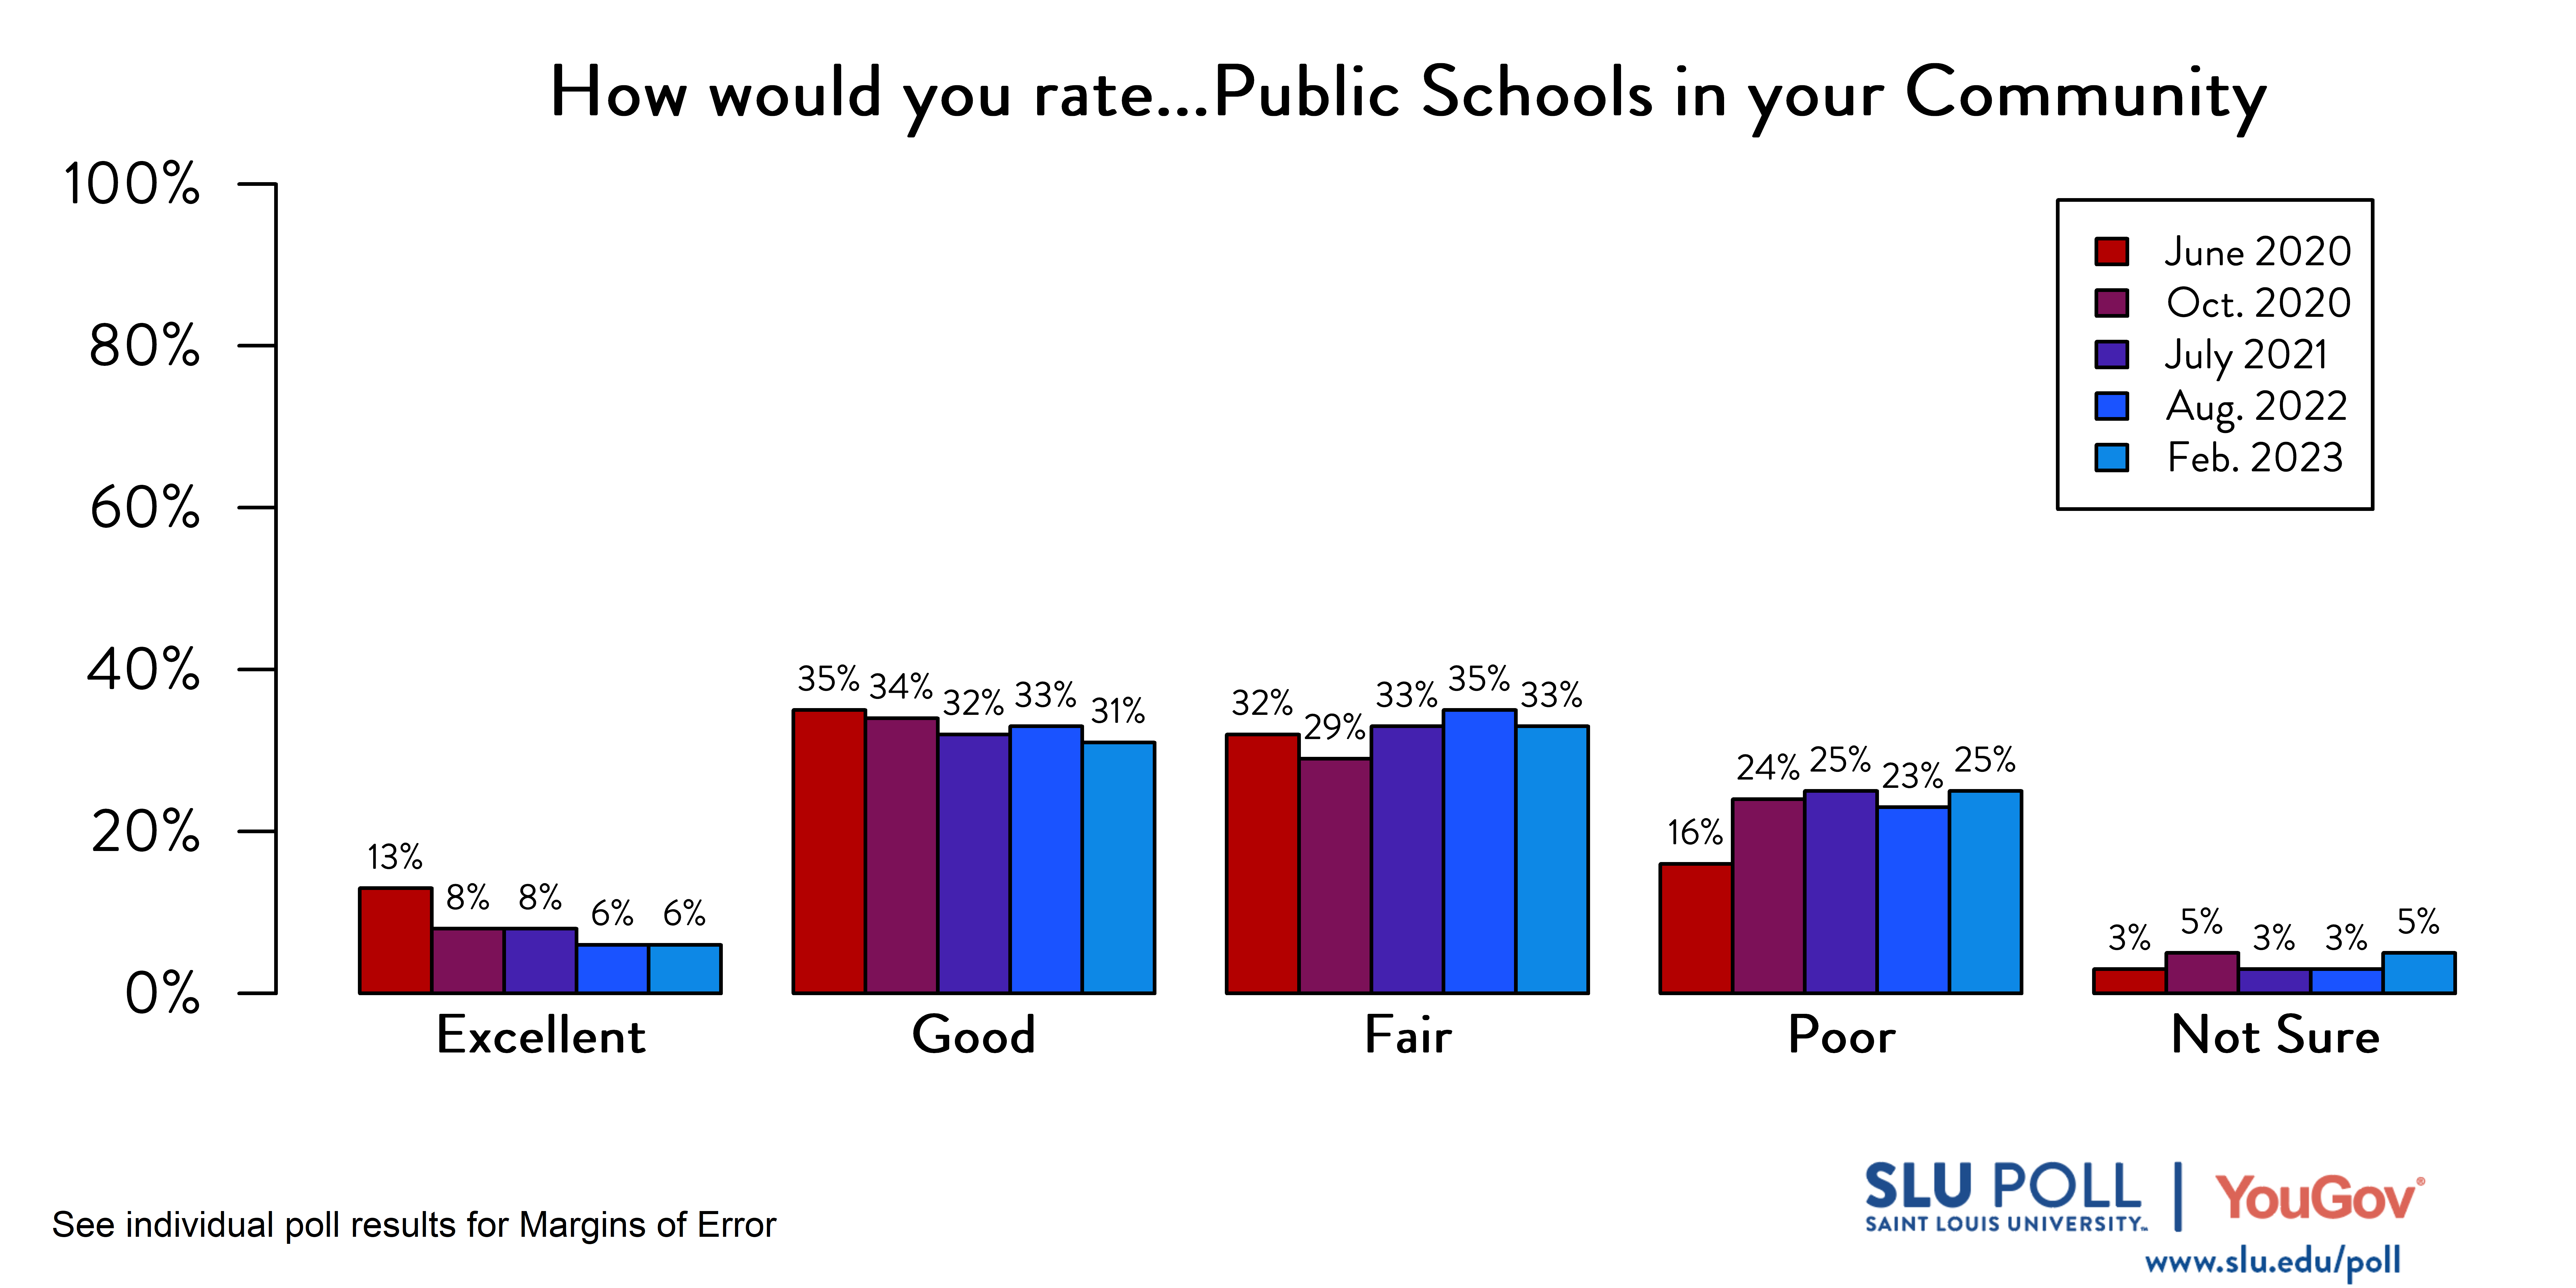 Likely voters' responses to 'How would you rate the condition of the following: Public Schools in your community?'. June 2020 Voter Responses 13% Excellent, 35% Good, 32% Fair, 16% Poor, and 3% Not Sure. October 2020 Voter Responses: 8% Excellent, 34% Good, 29% Fair, 24% Poor, and 5% Not sure. July 2021 Voter Responses: 8% Excellent, 32% Good, 33% Fair, 25% Poor, and 3% Not sure. August 2022 Voter Responses: 6% Excellent, 33% Good, 35% Fair, 23% Poor, and 3% Not sure. Februrary 2023 Voter Responses: 6% Excellent, 31% Good, 33% Fair, 25% Poor, and 5% Not sure.